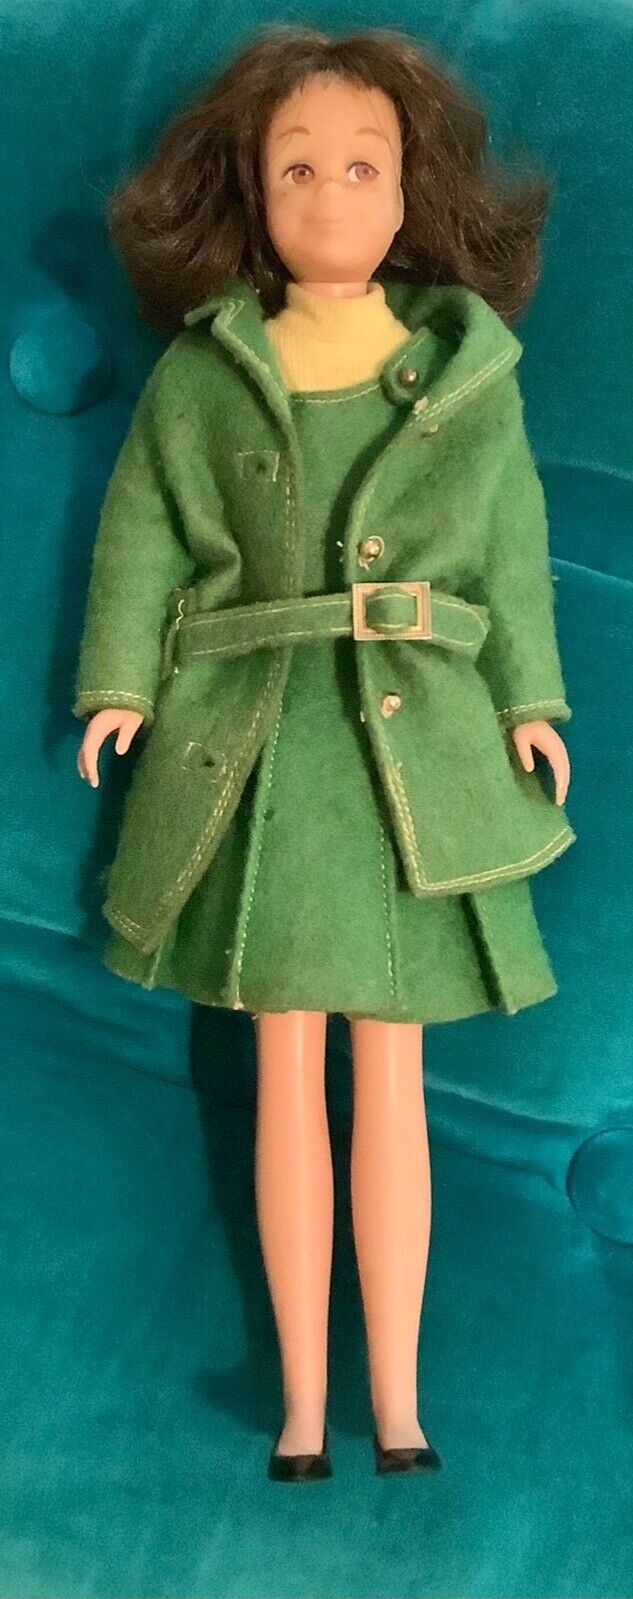 RARE Vintage Barbie PREMIER TOGS GOLD green BALL GOWN Dress 👗 No Doll |  eBay